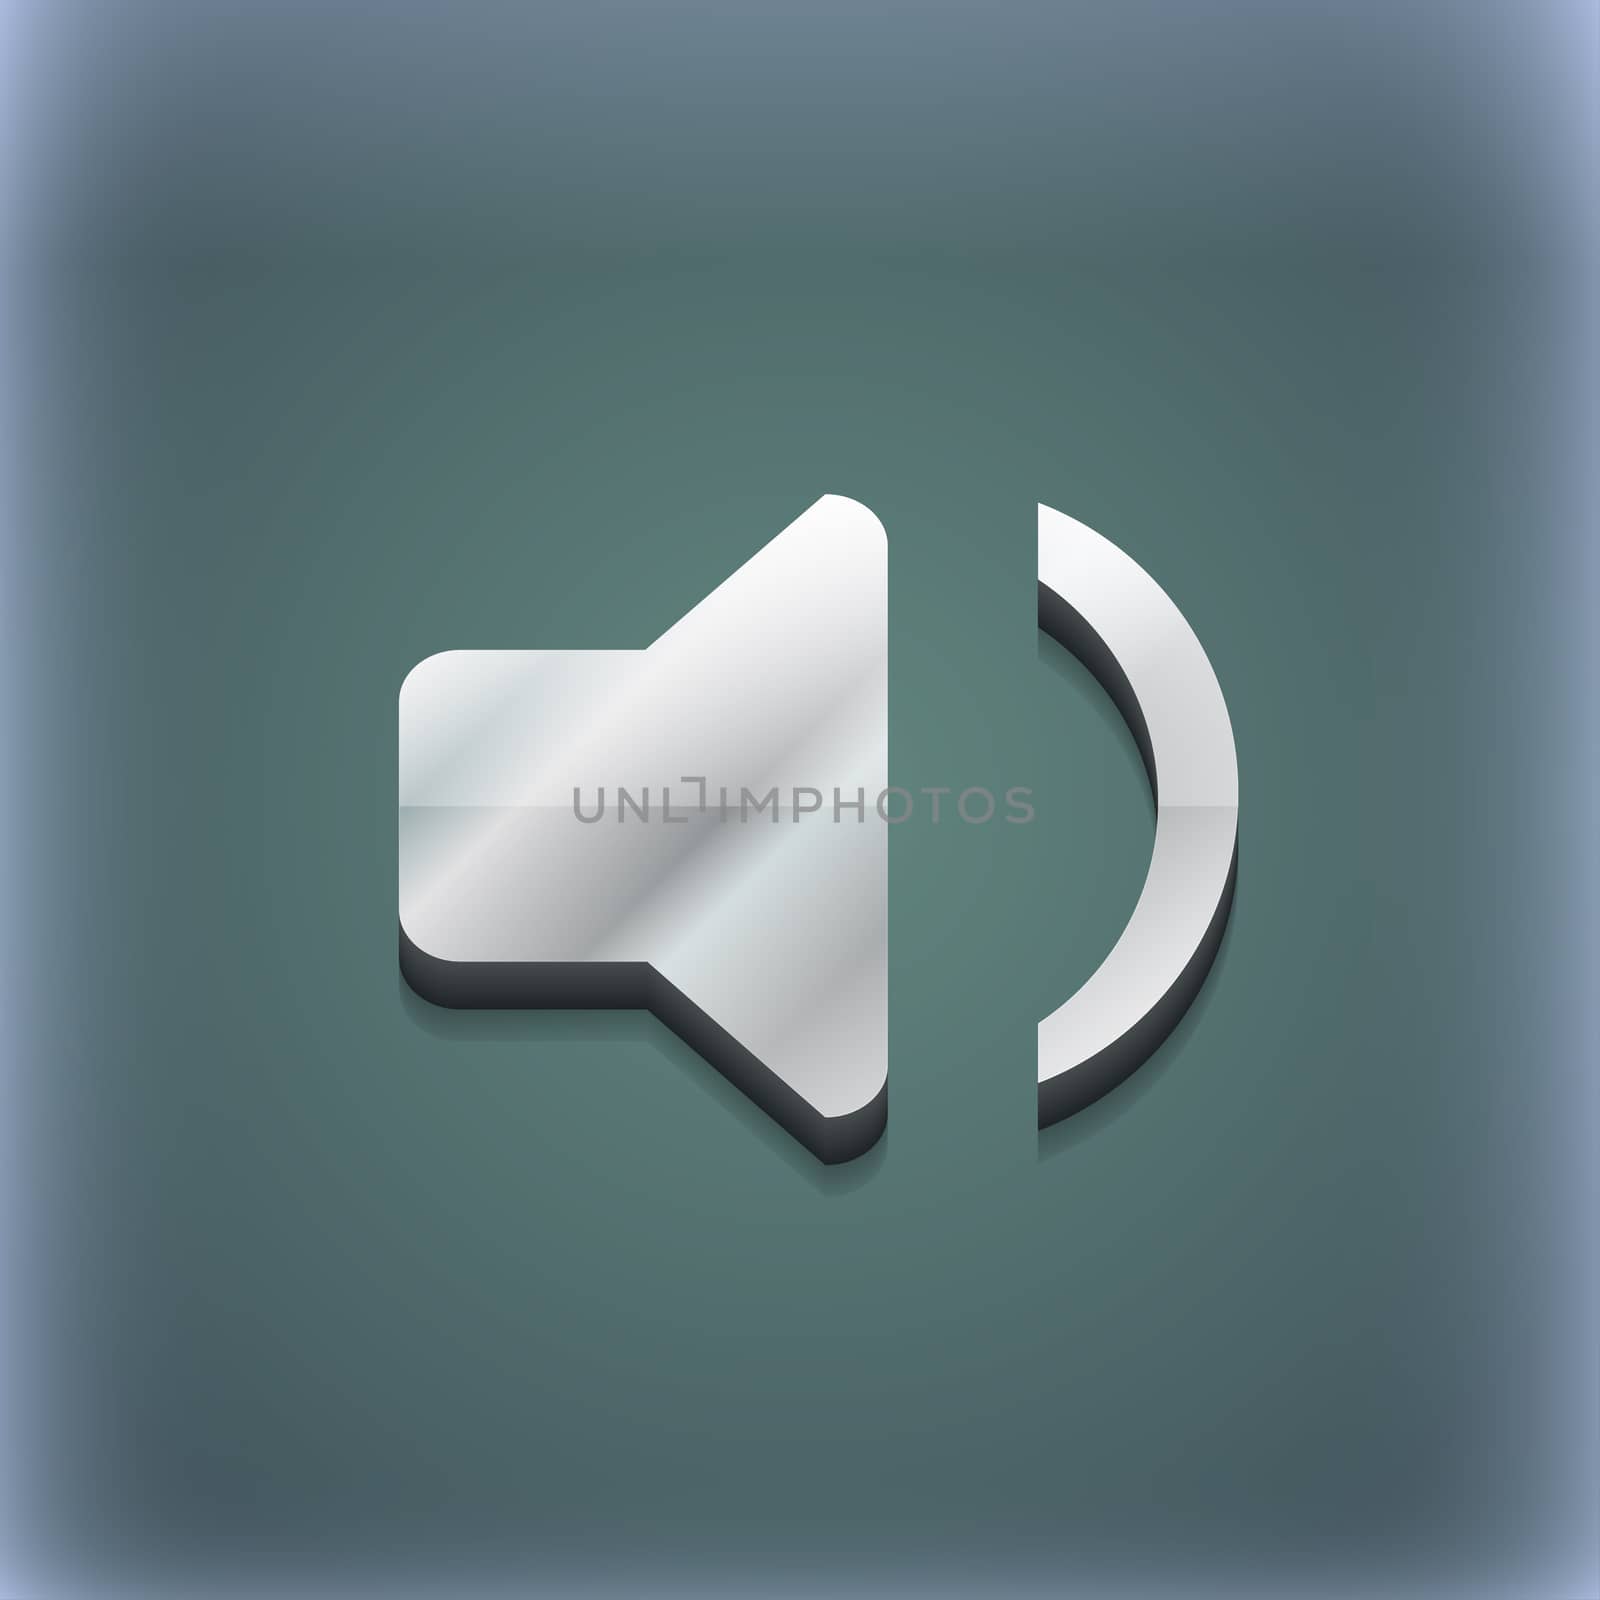 Speaker volume, Sound icon symbol. 3D style. Trendy, modern design with space for your text illustration. Raster version